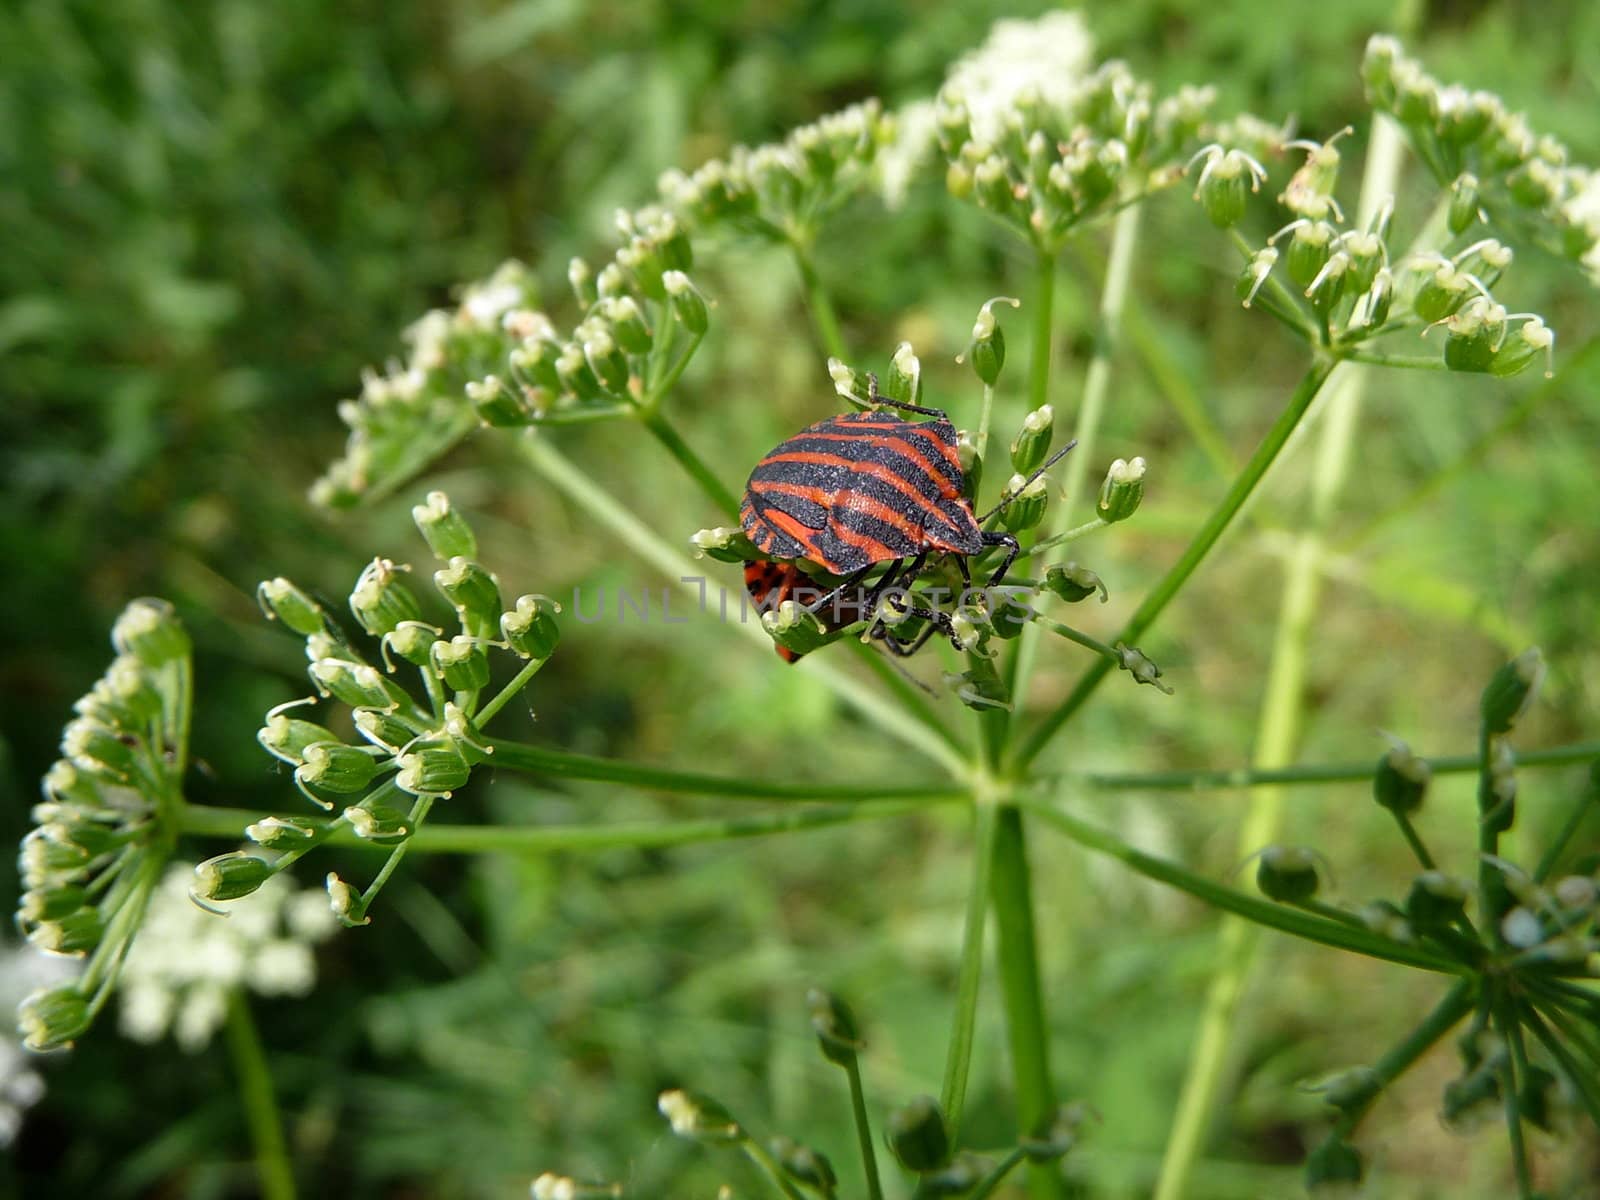 Striped forest bug by tomatto